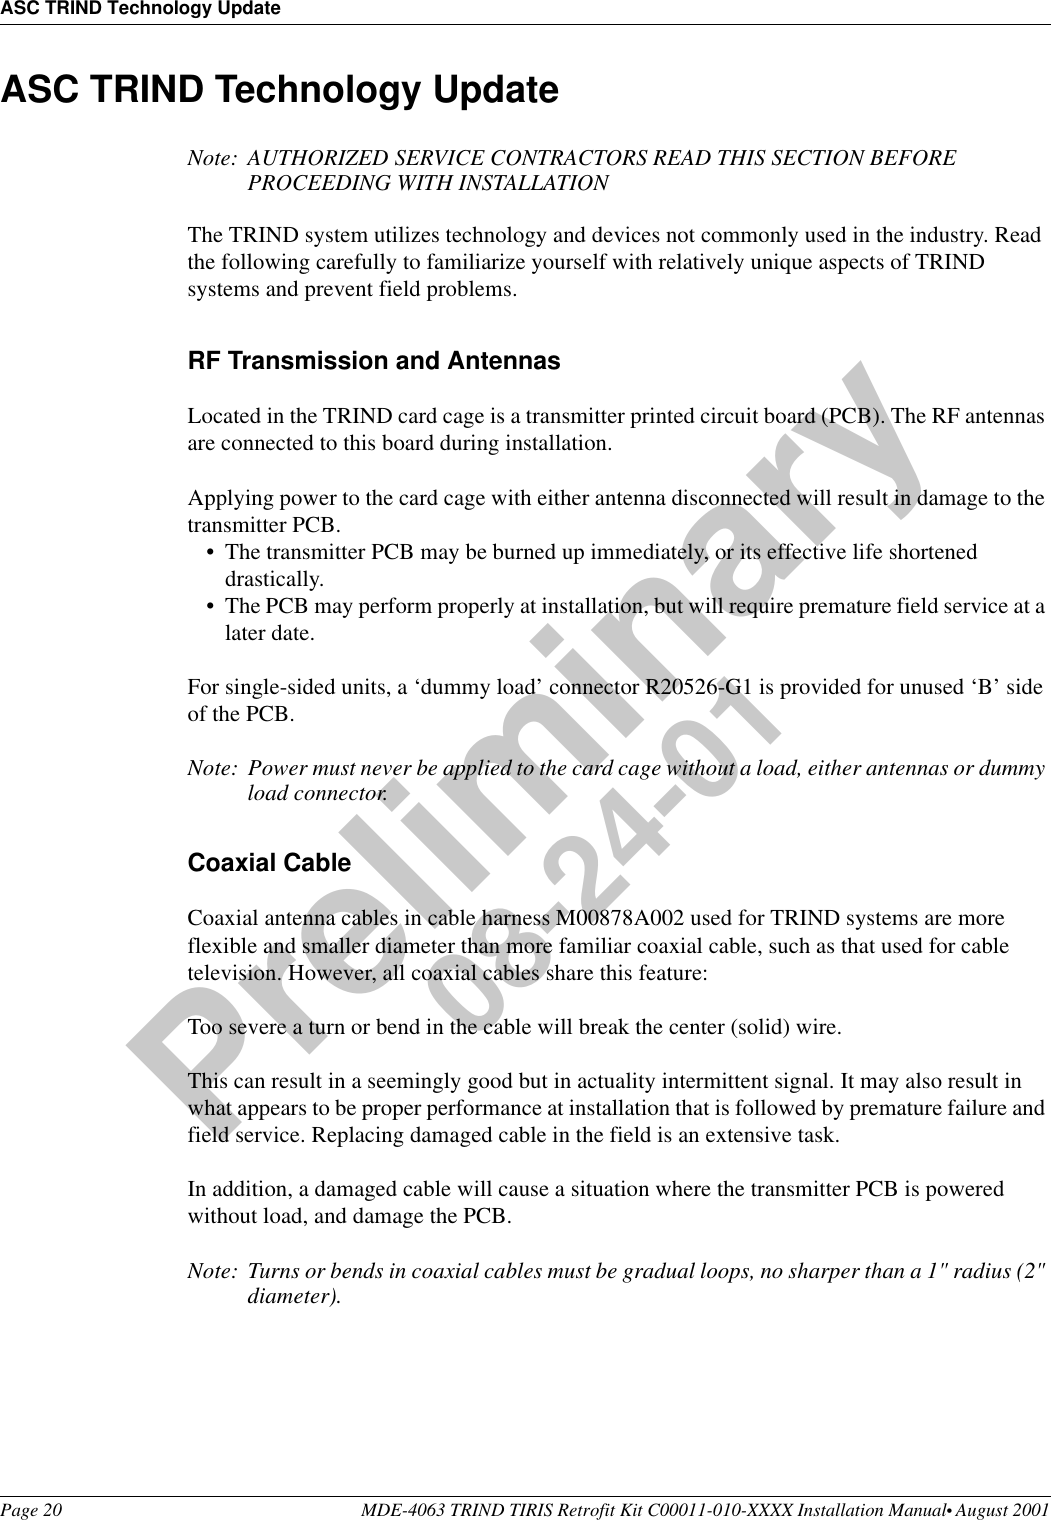 ASC TRIND Technology UpdatePage 20 MDE-4063 TRIND TIRIS Retrofit Kit C00011-010-XXXX Installation Manual• August 2001Preliminary08-24-01ASC TRIND Technology UpdateNote: AUTHORIZED SERVICE CONTRACTORS READ THIS SECTION BEFORE PROCEEDING WITH INSTALLATIONThe TRIND system utilizes technology and devices not commonly used in the industry. Read the following carefully to familiarize yourself with relatively unique aspects of TRIND systems and prevent field problems.RF Transmission and AntennasLocated in the TRIND card cage is a transmitter printed circuit board (PCB). The RF antennas are connected to this board during installation.Applying power to the card cage with either antenna disconnected will result in damage to the transmitter PCB. •The transmitter PCB may be burned up immediately, or its effective life shortened drastically. •The PCB may perform properly at installation, but will require premature field service at a later date.For single-sided units, a ‘dummy load’ connector R20526-G1 is provided for unused ‘B’ side of the PCB.Note: Power must never be applied to the card cage without a load, either antennas or dummy load connector.Coaxial CableCoaxial antenna cables in cable harness M00878A002 used for TRIND systems are more flexible and smaller diameter than more familiar coaxial cable, such as that used for cable television. However, all coaxial cables share this feature:Too severe a turn or bend in the cable will break the center (solid) wire.This can result in a seemingly good but in actuality intermittent signal. It may also result in what appears to be proper performance at installation that is followed by premature failure and field service. Replacing damaged cable in the field is an extensive task.In addition, a damaged cable will cause a situation where the transmitter PCB is powered without load, and damage the PCB.Note: Turns or bends in coaxial cables must be gradual loops, no sharper than a 1&quot; radius (2&quot; diameter).